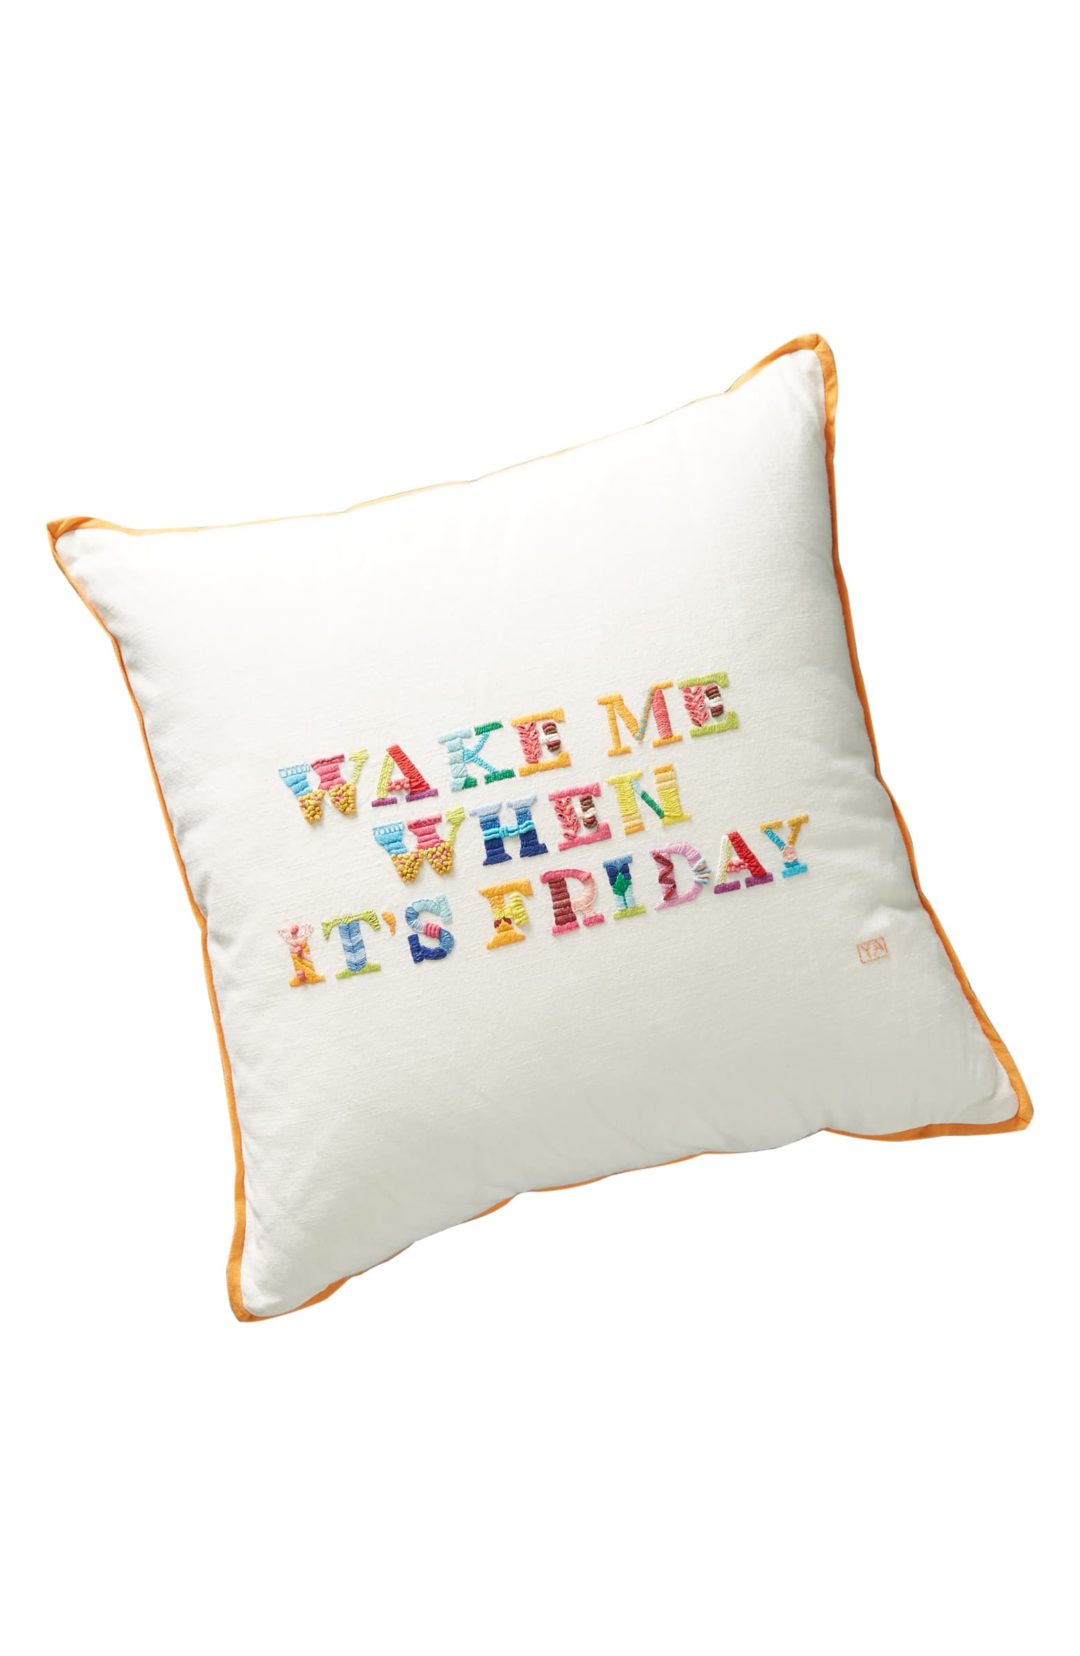 Yolanda Andres Friday Embroidered Pillow